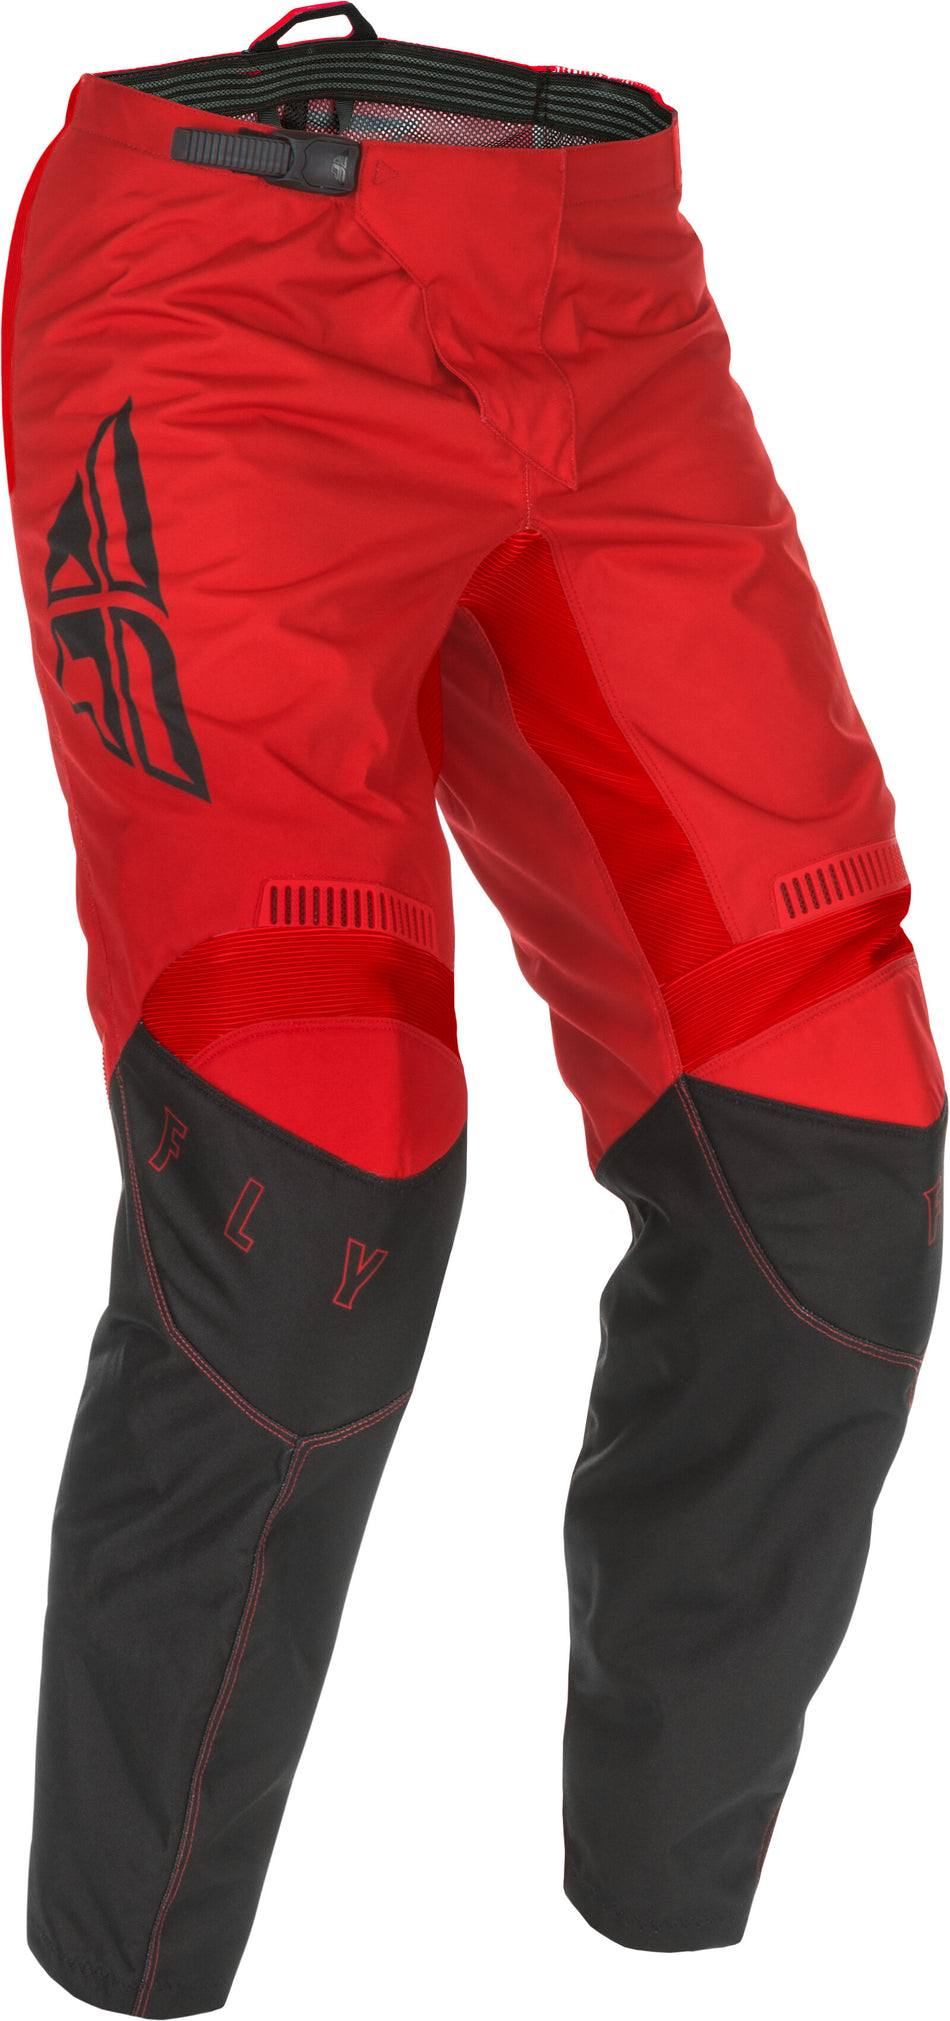 FLY RACING Youth F-16 Pants Red/Black Sz 20 374-93220